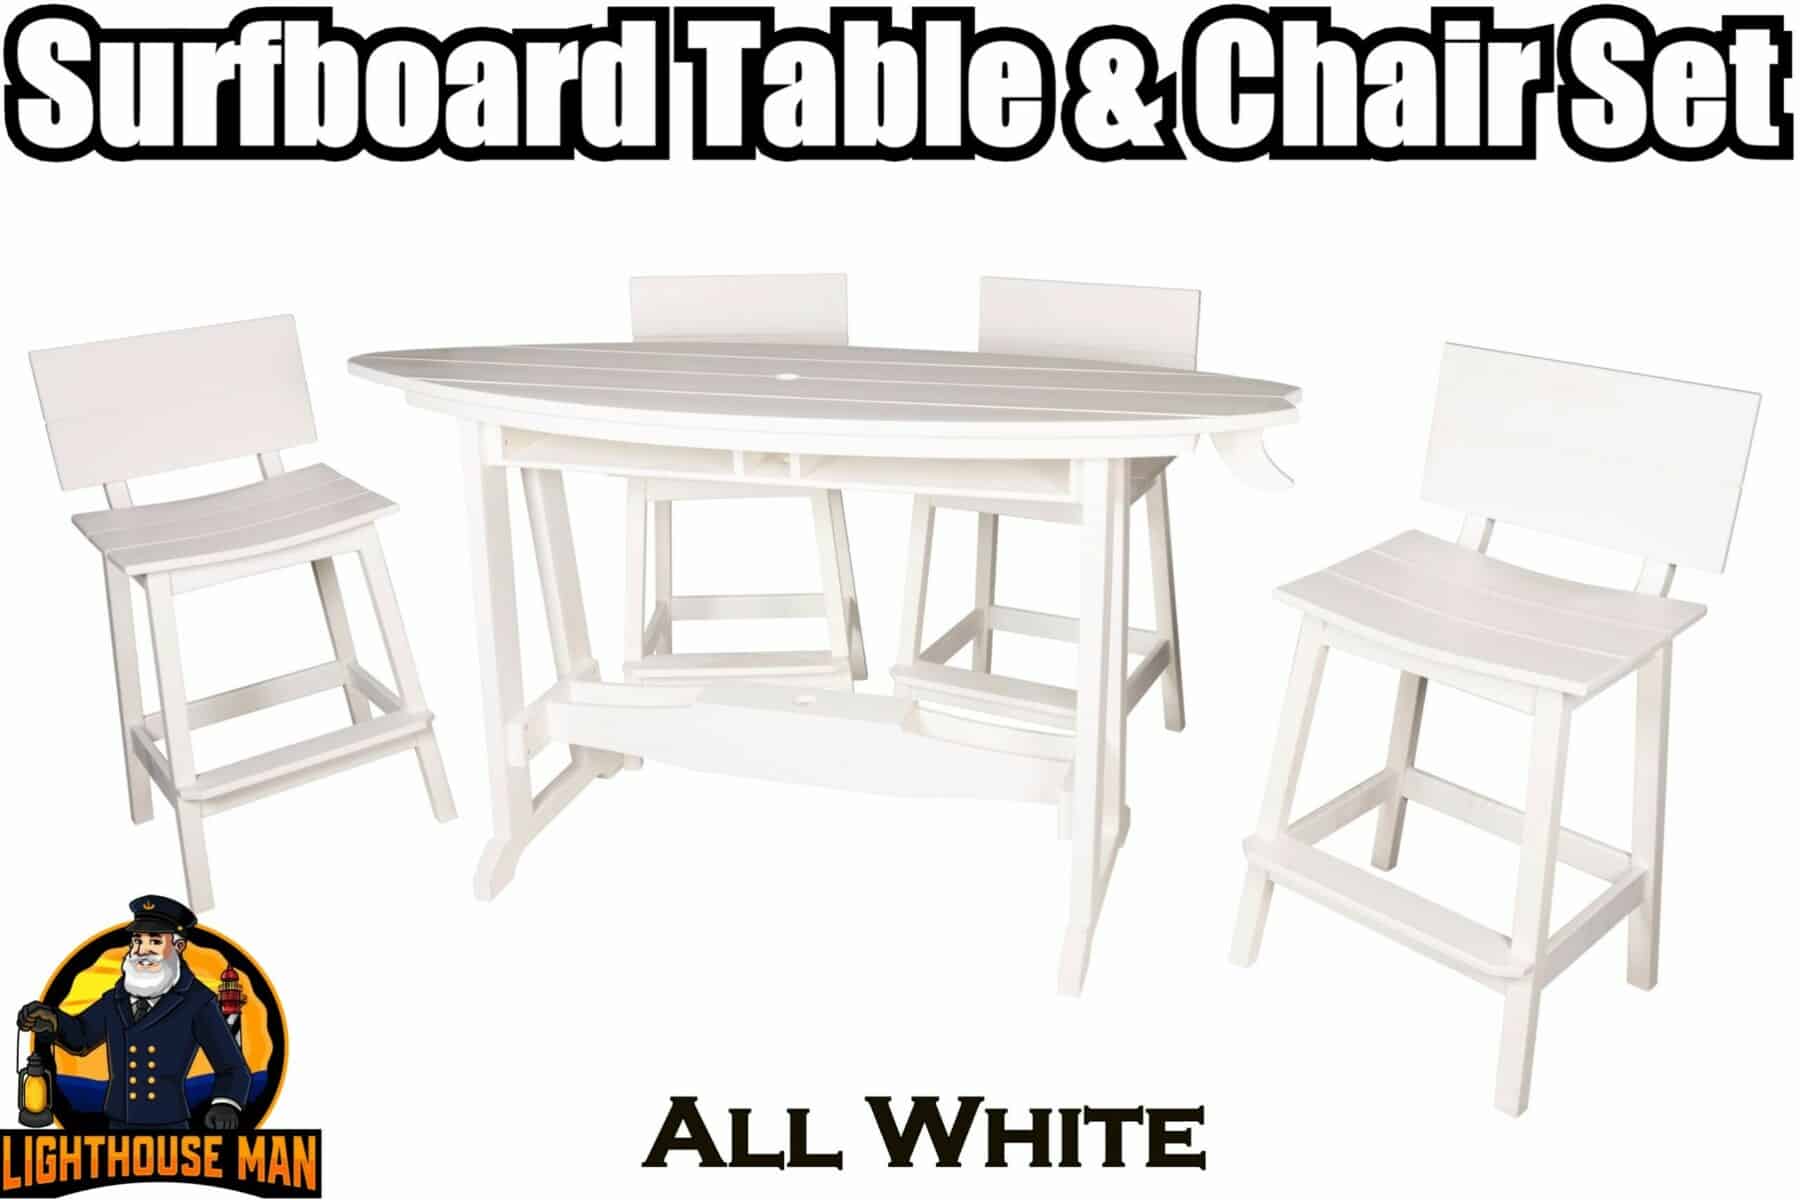 Surfboard Table & Chairs All White